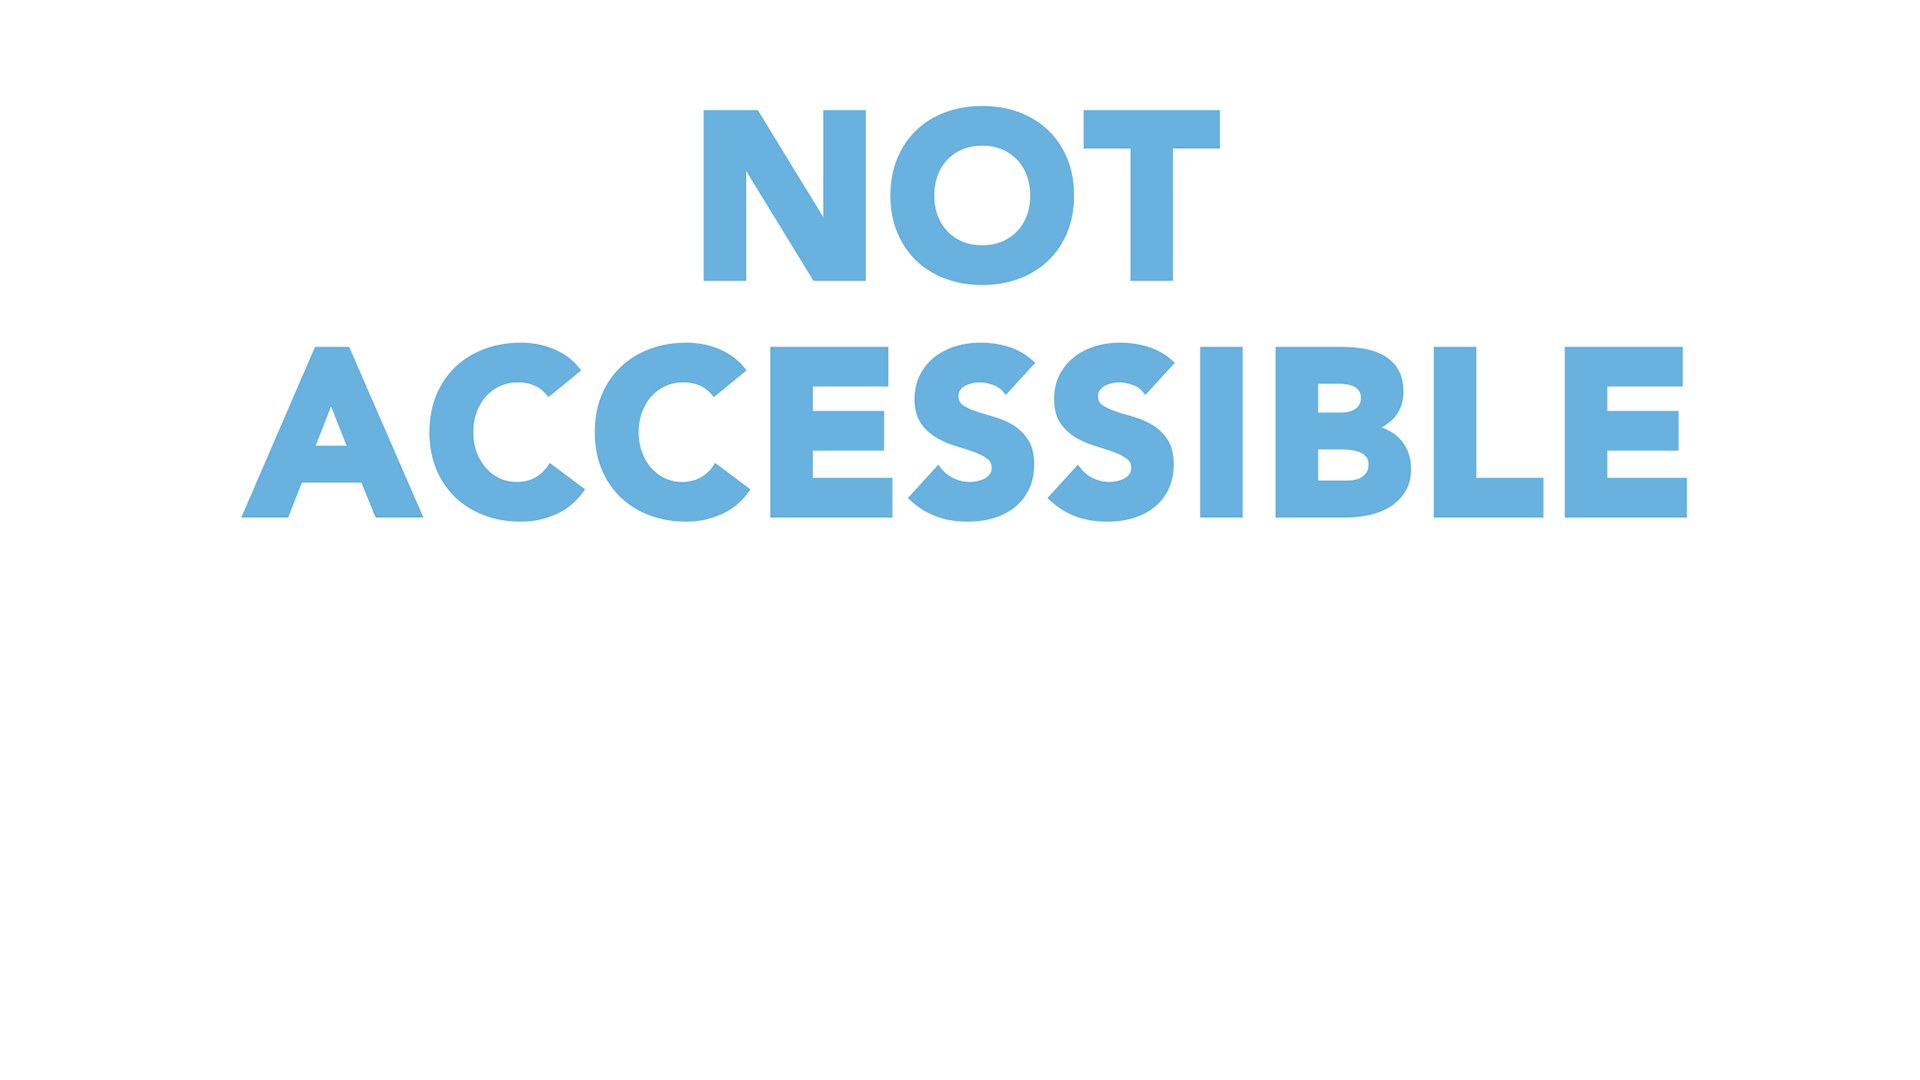 gif that says "not accessible"